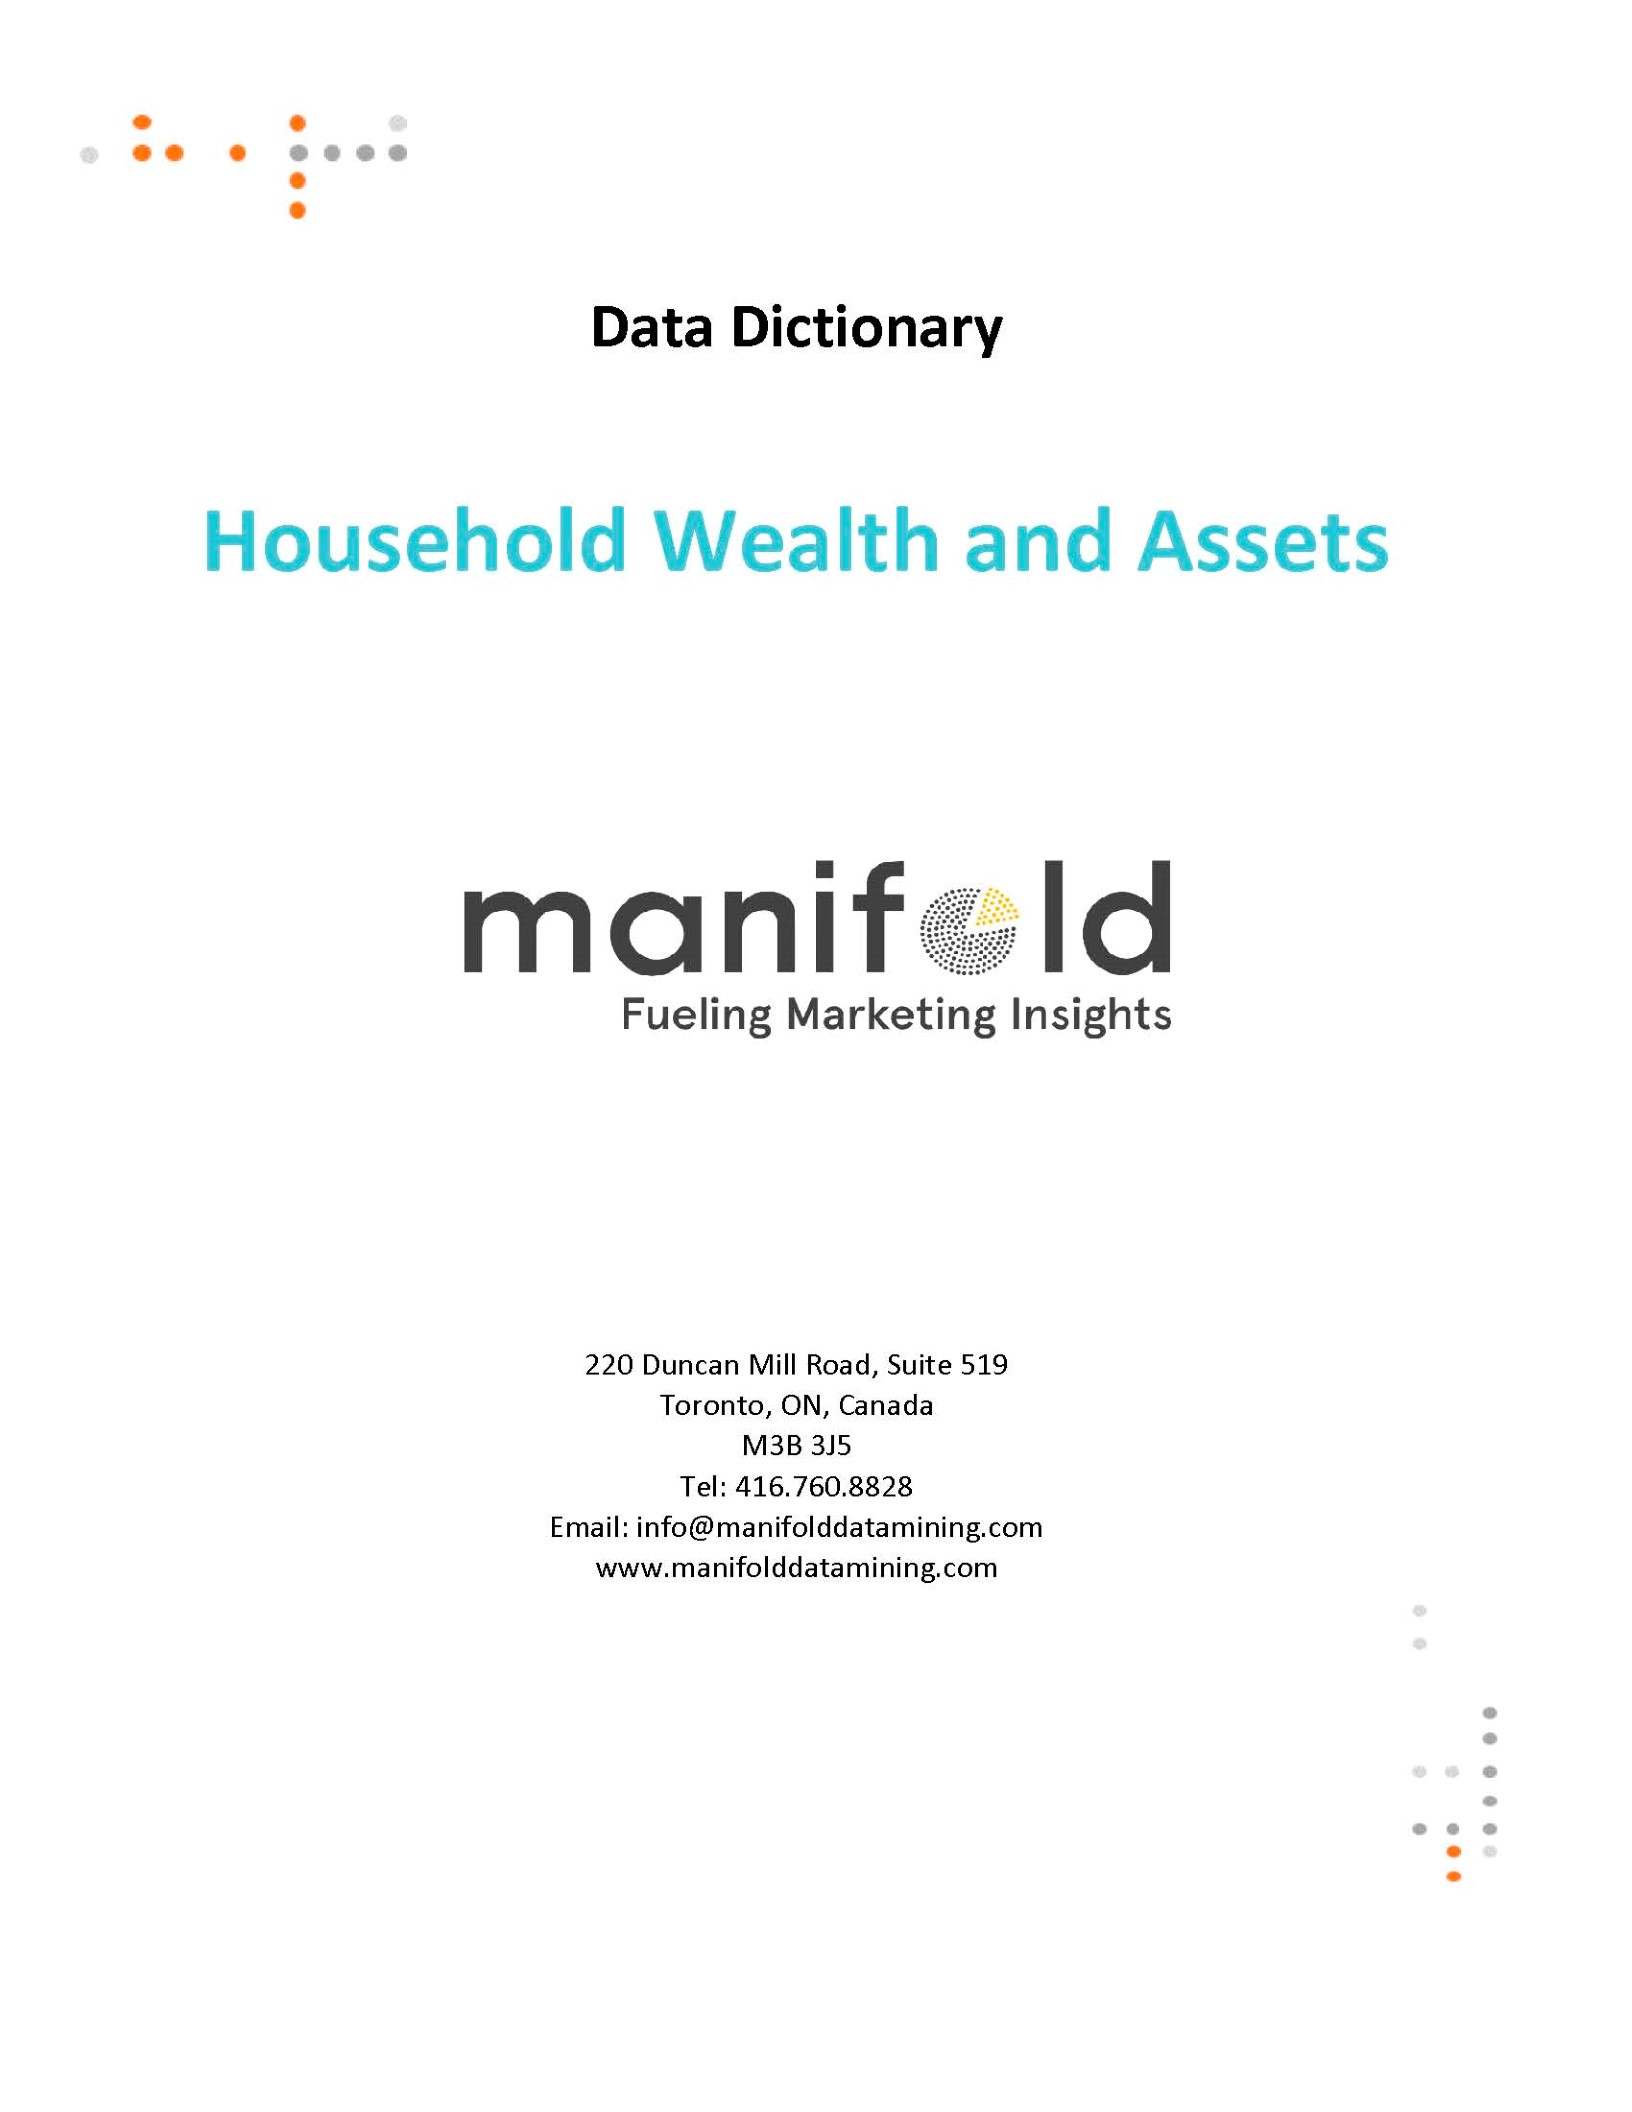 Data Dictionary Household Wealth and Assets_Page_1